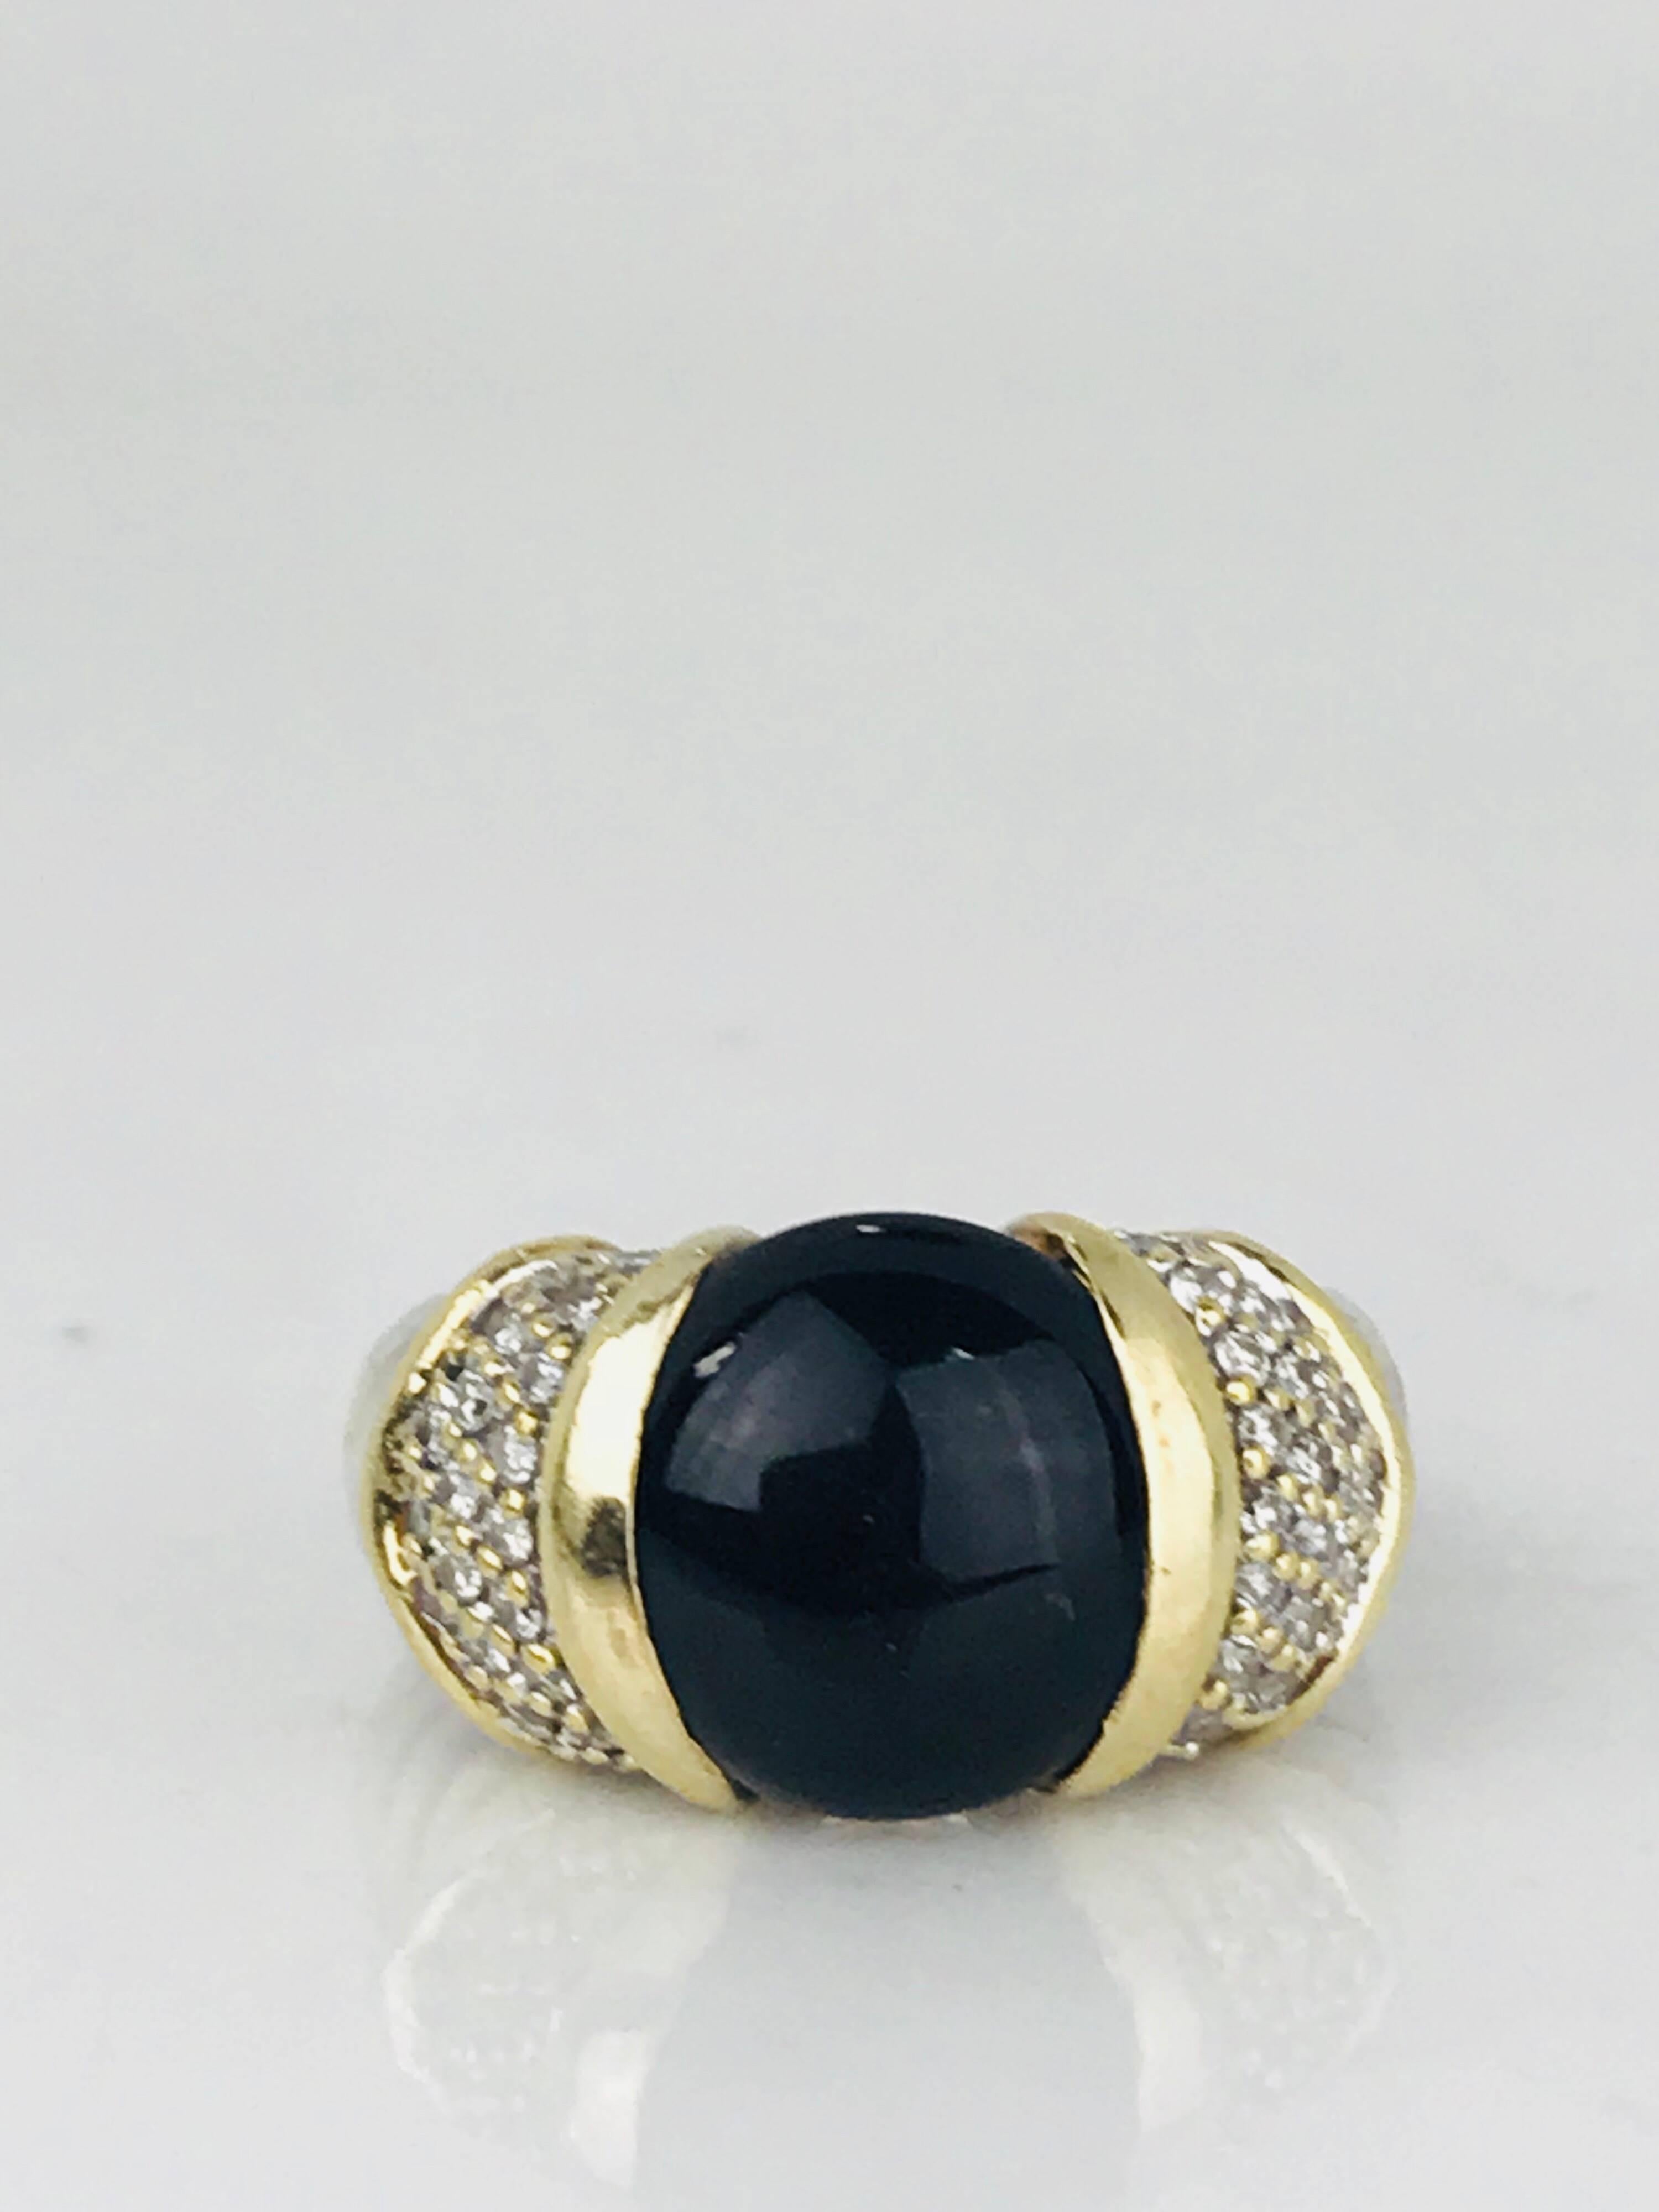 Contemporary David Yurman ring features a round polished black onyx stone, bar-set in 18 karat gold, flanked on both sides with (44) round brilliant pave set diamonds on a sterling silver signature cable-style band.

Black onyx stone measures 12.10